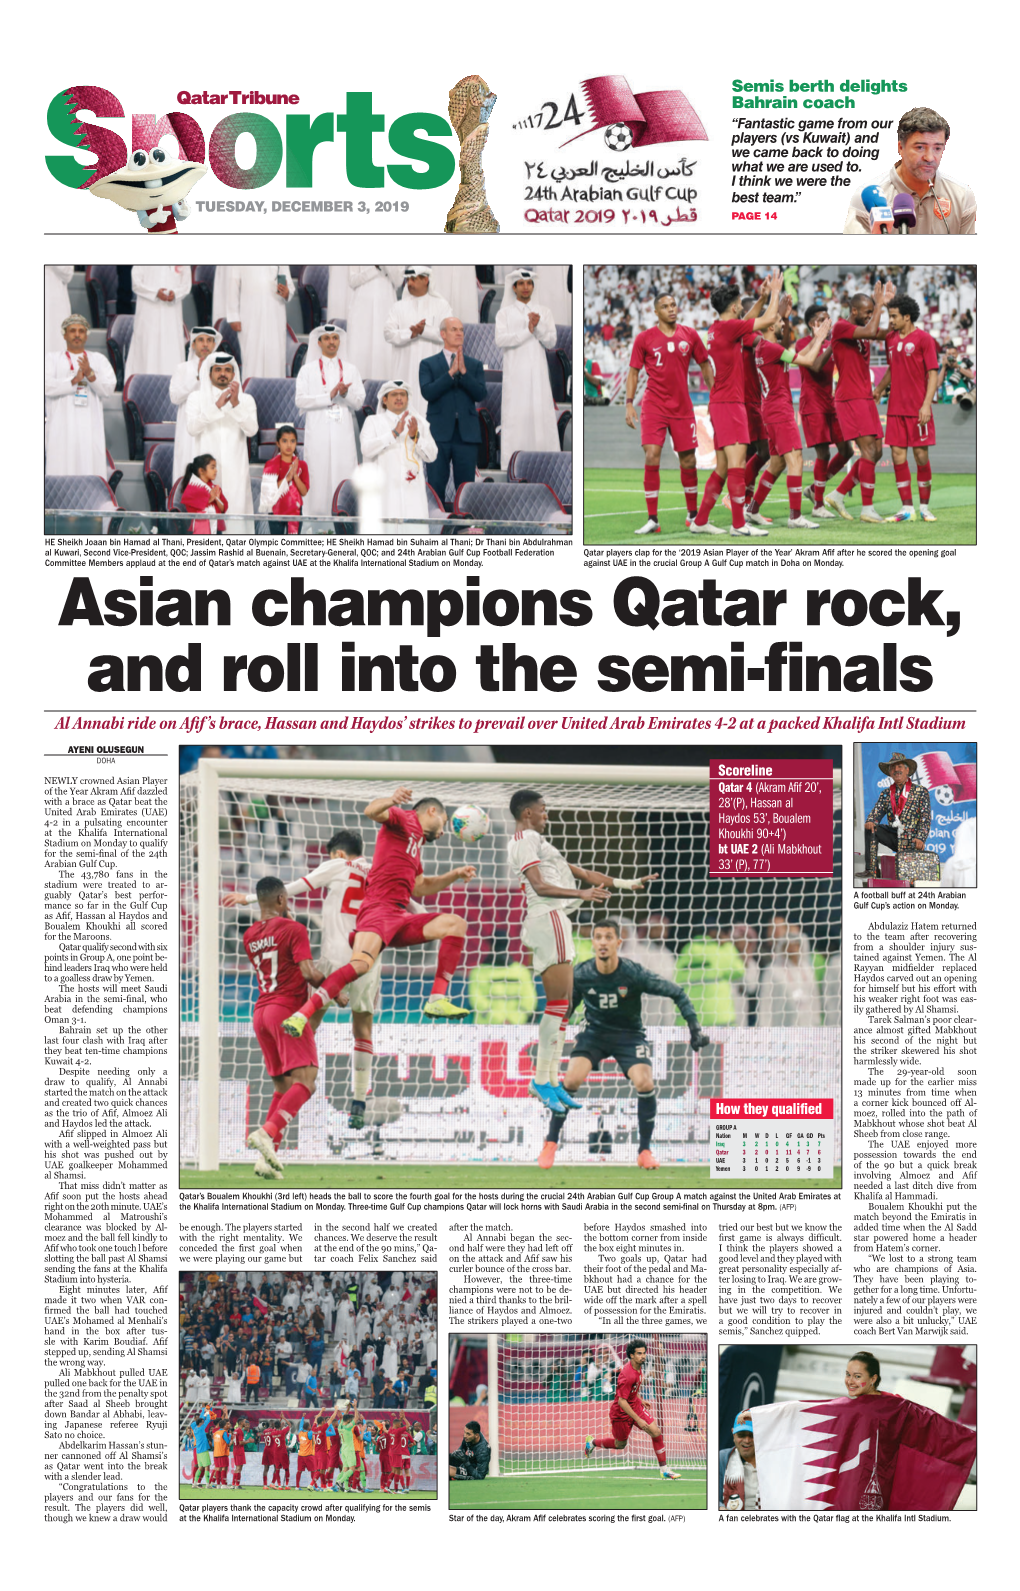 Asian Champions Qatar Rock, and Roll Into the Semi-Finals